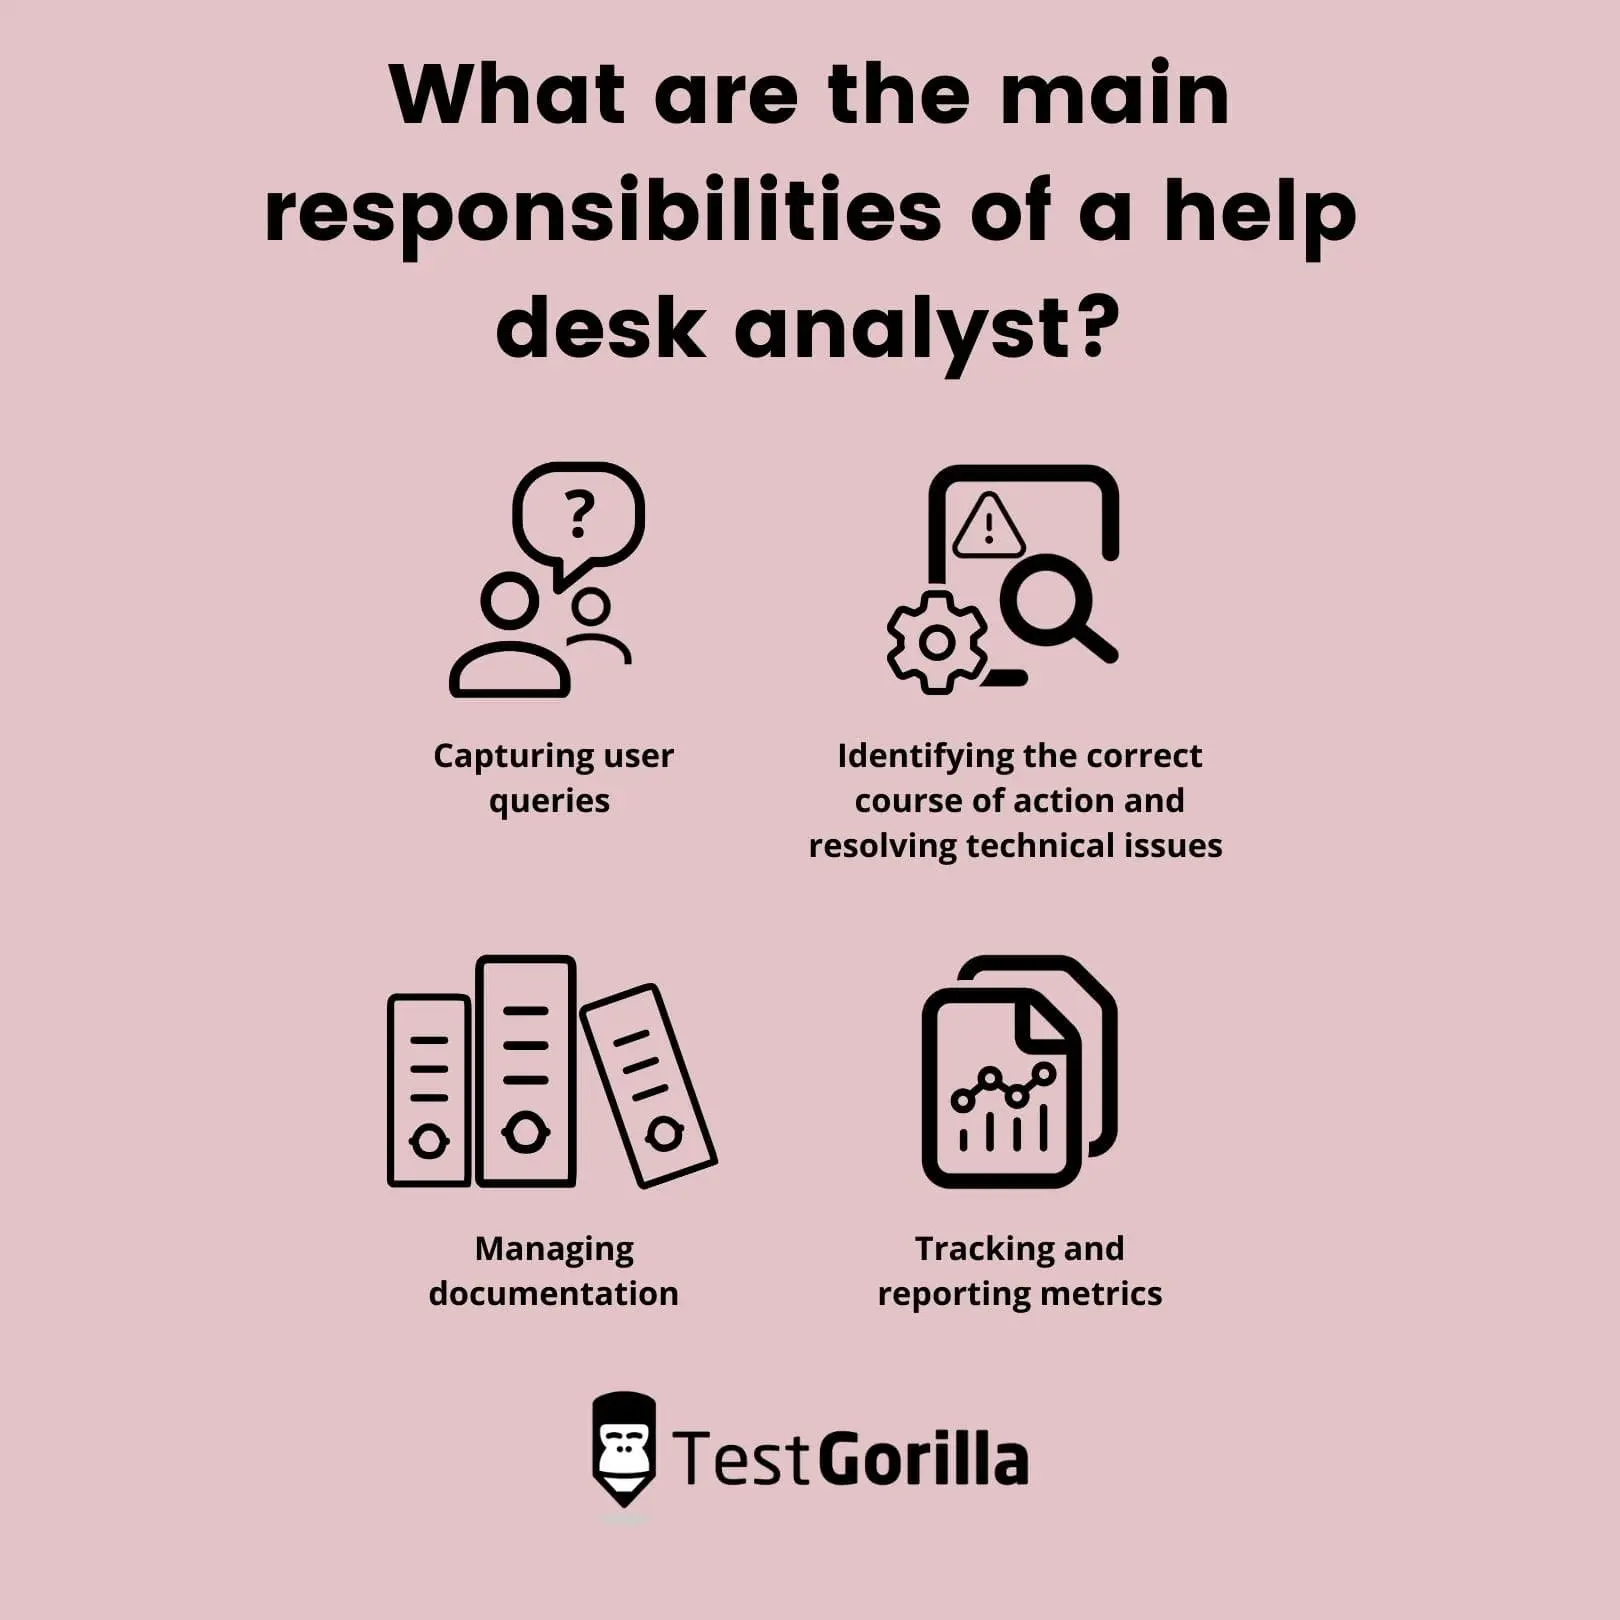 What are the main responsibilities of a help desk analyst?